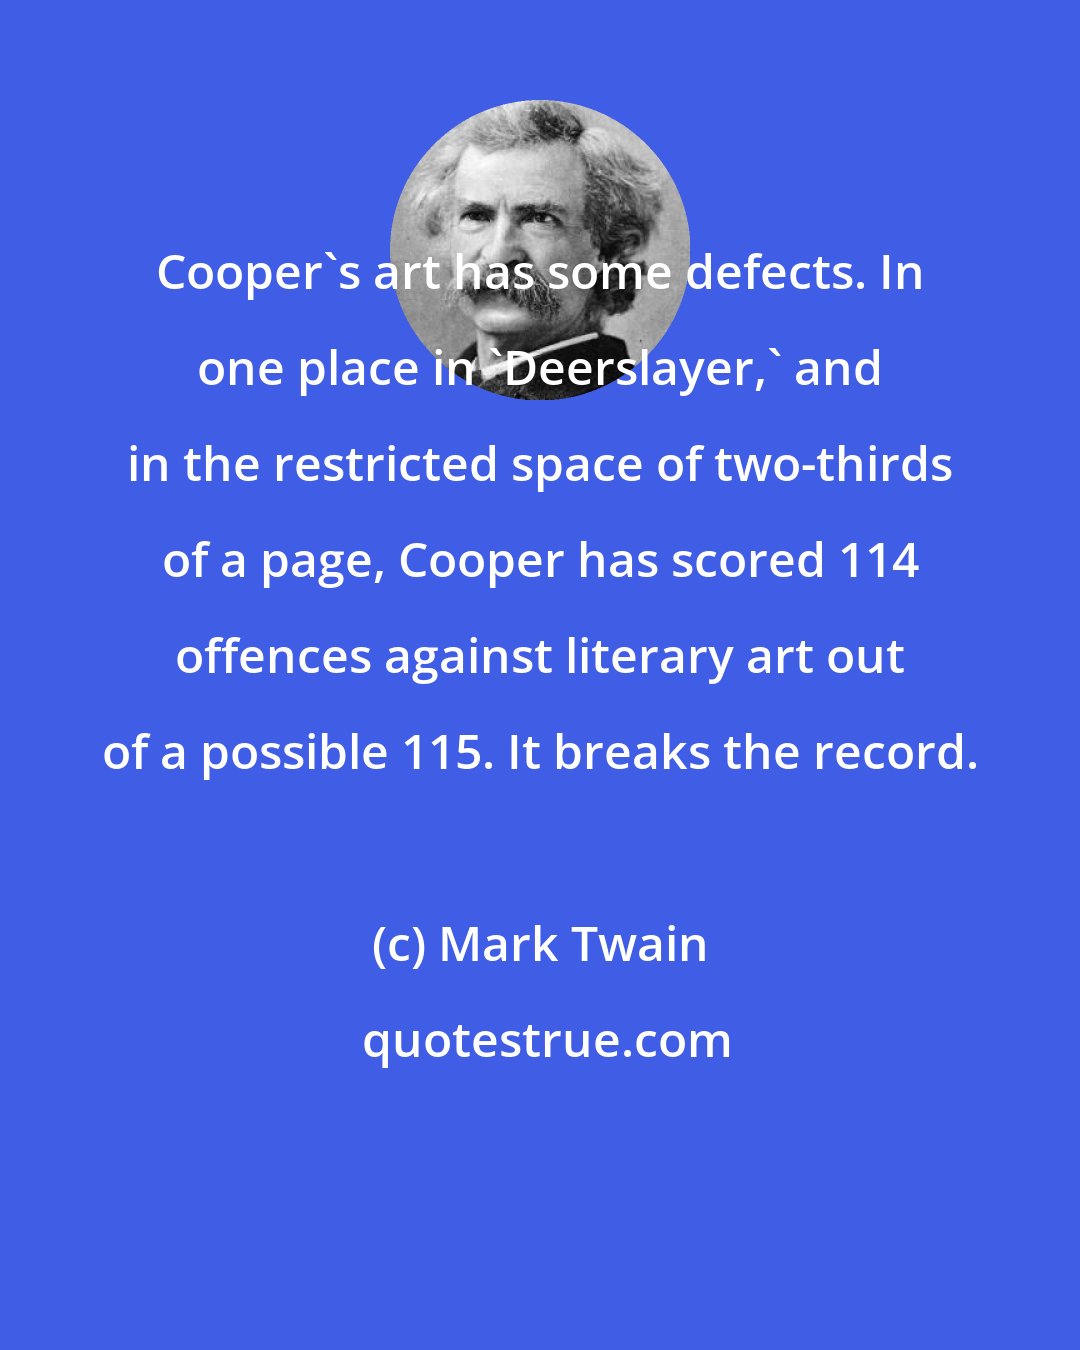 Mark Twain: Cooper's art has some defects. In one place in 'Deerslayer,' and in the restricted space of two-thirds of a page, Cooper has scored 114 offences against literary art out of a possible 115. It breaks the record.